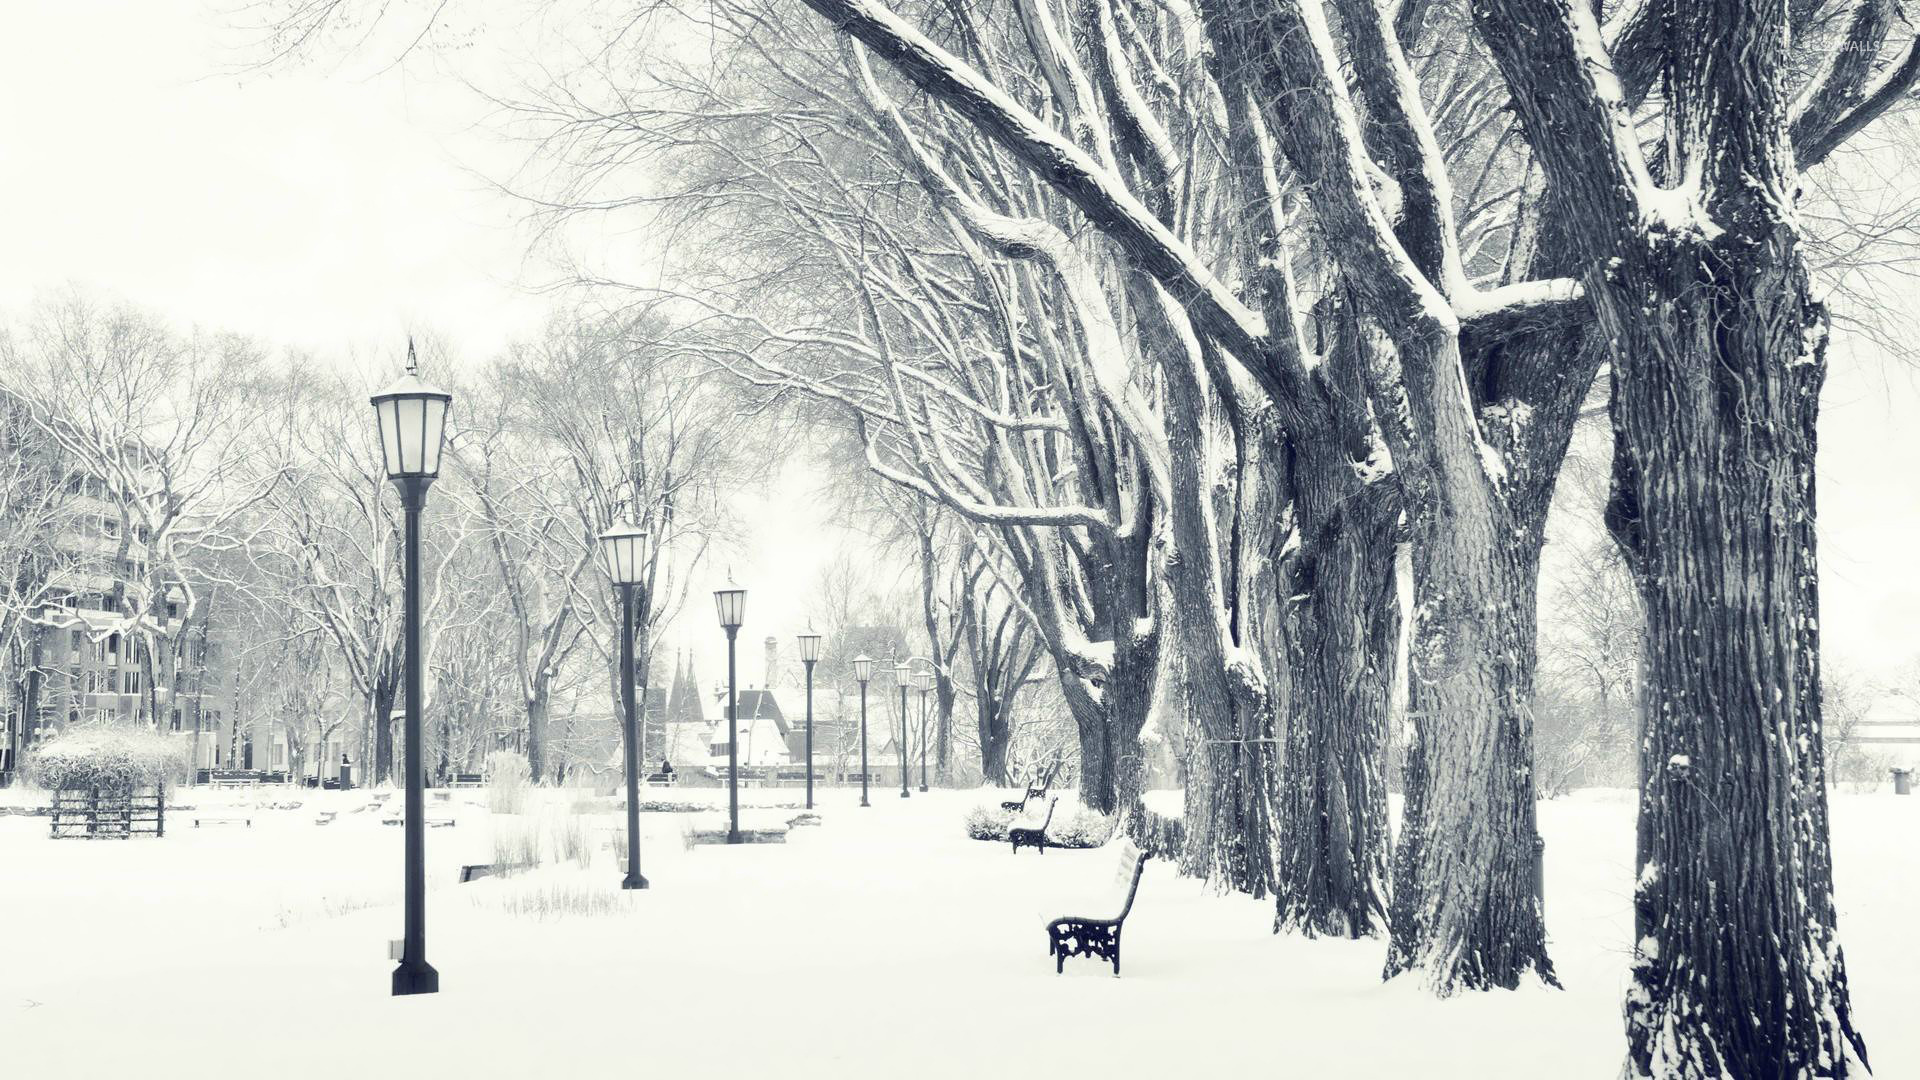 Winter in the park [2] wallpaper - Photography wallpapers - #16694